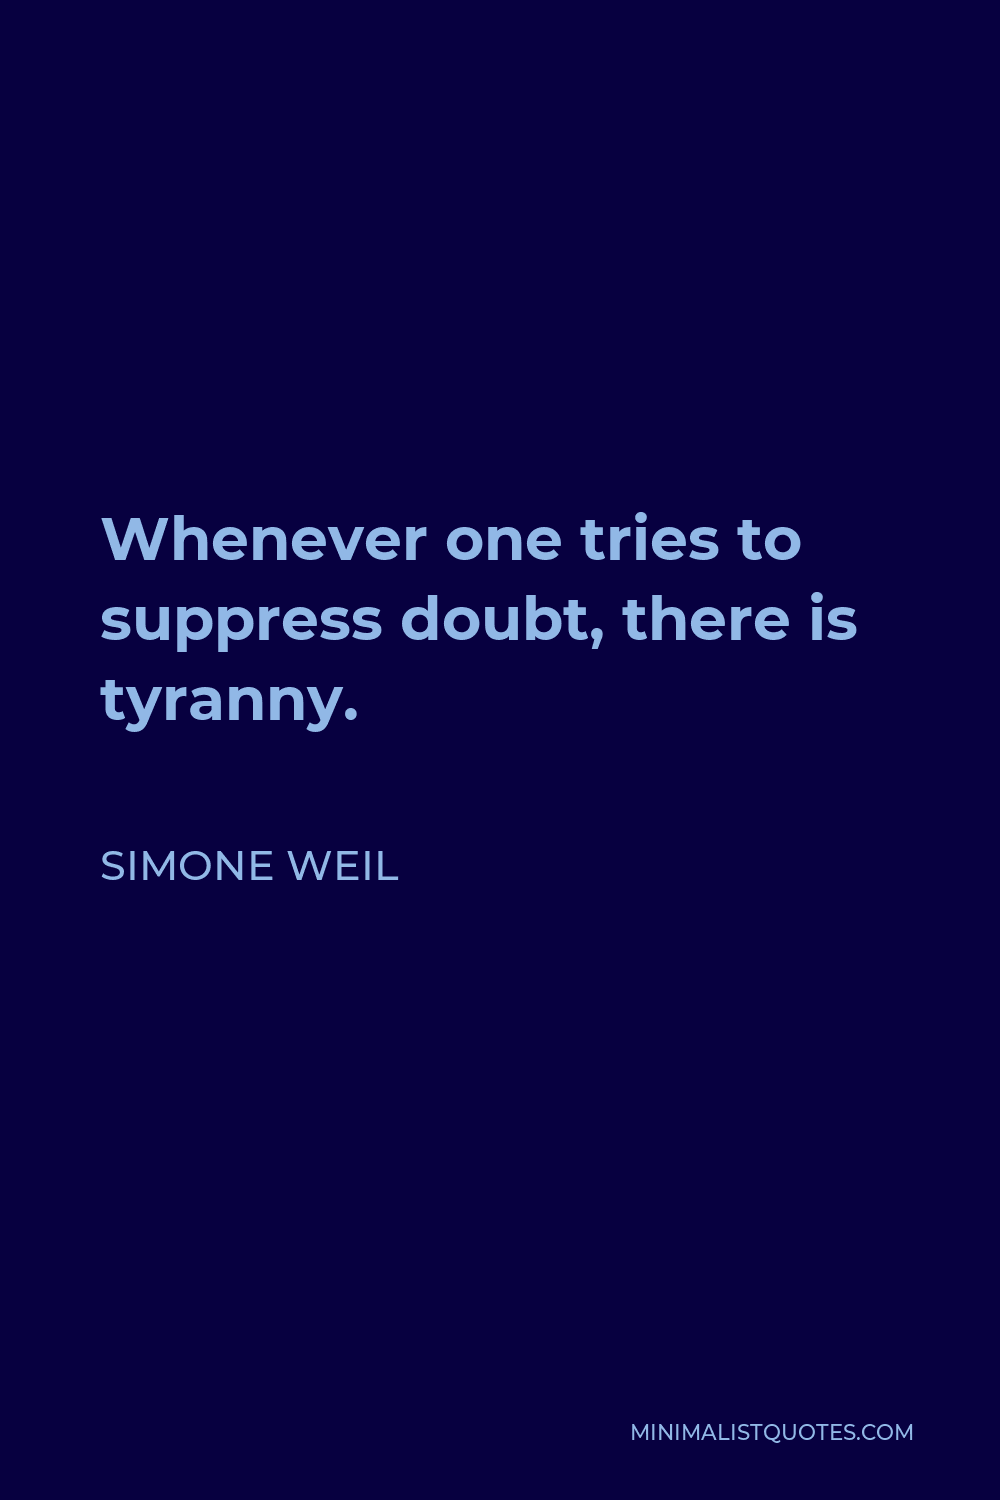 Simone Weil Quote - Whenever one tries to suppress doubt, there is tyranny.